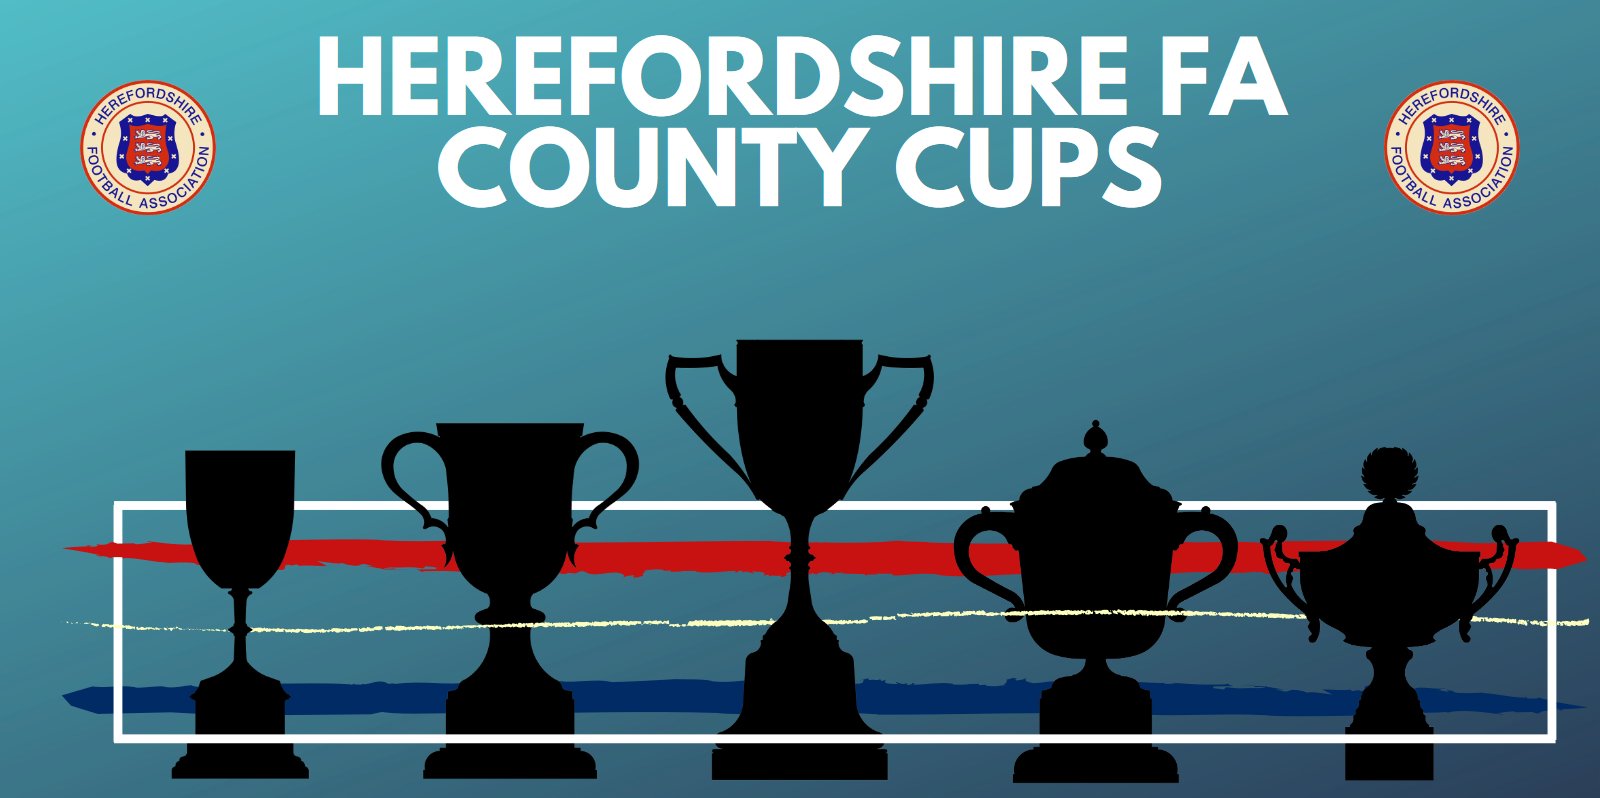 FOOTBALL | Win a County Cup Sponsorship Package